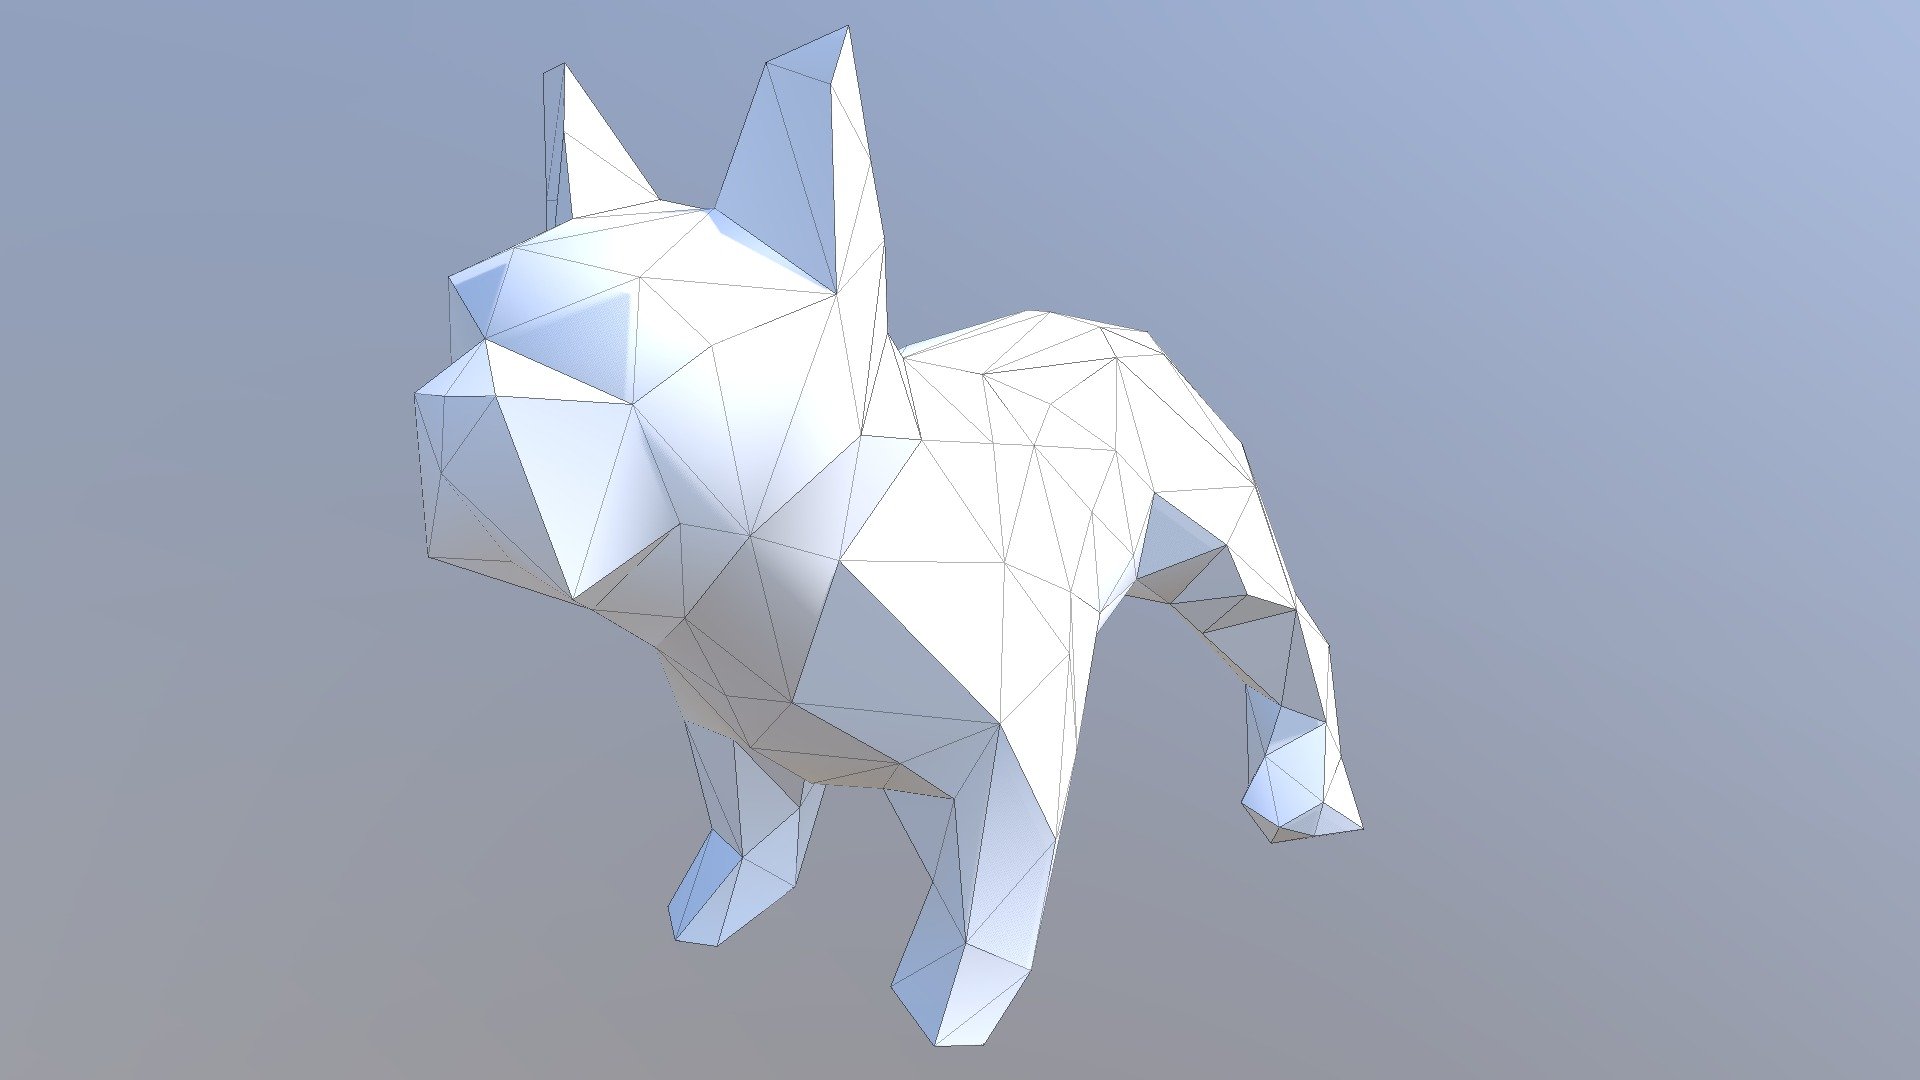 Low Poly Dog, for papercraft or 3d printing, could be edited
if you try it i want to see the result you get, pls name #Encraft on facebook when you share, thx a lot
1$ on https://www.fb.com/ENCraft7/
Just Ask - Low Poly Dog - 3D model by ENCraft (@ENCraft7) 3d model